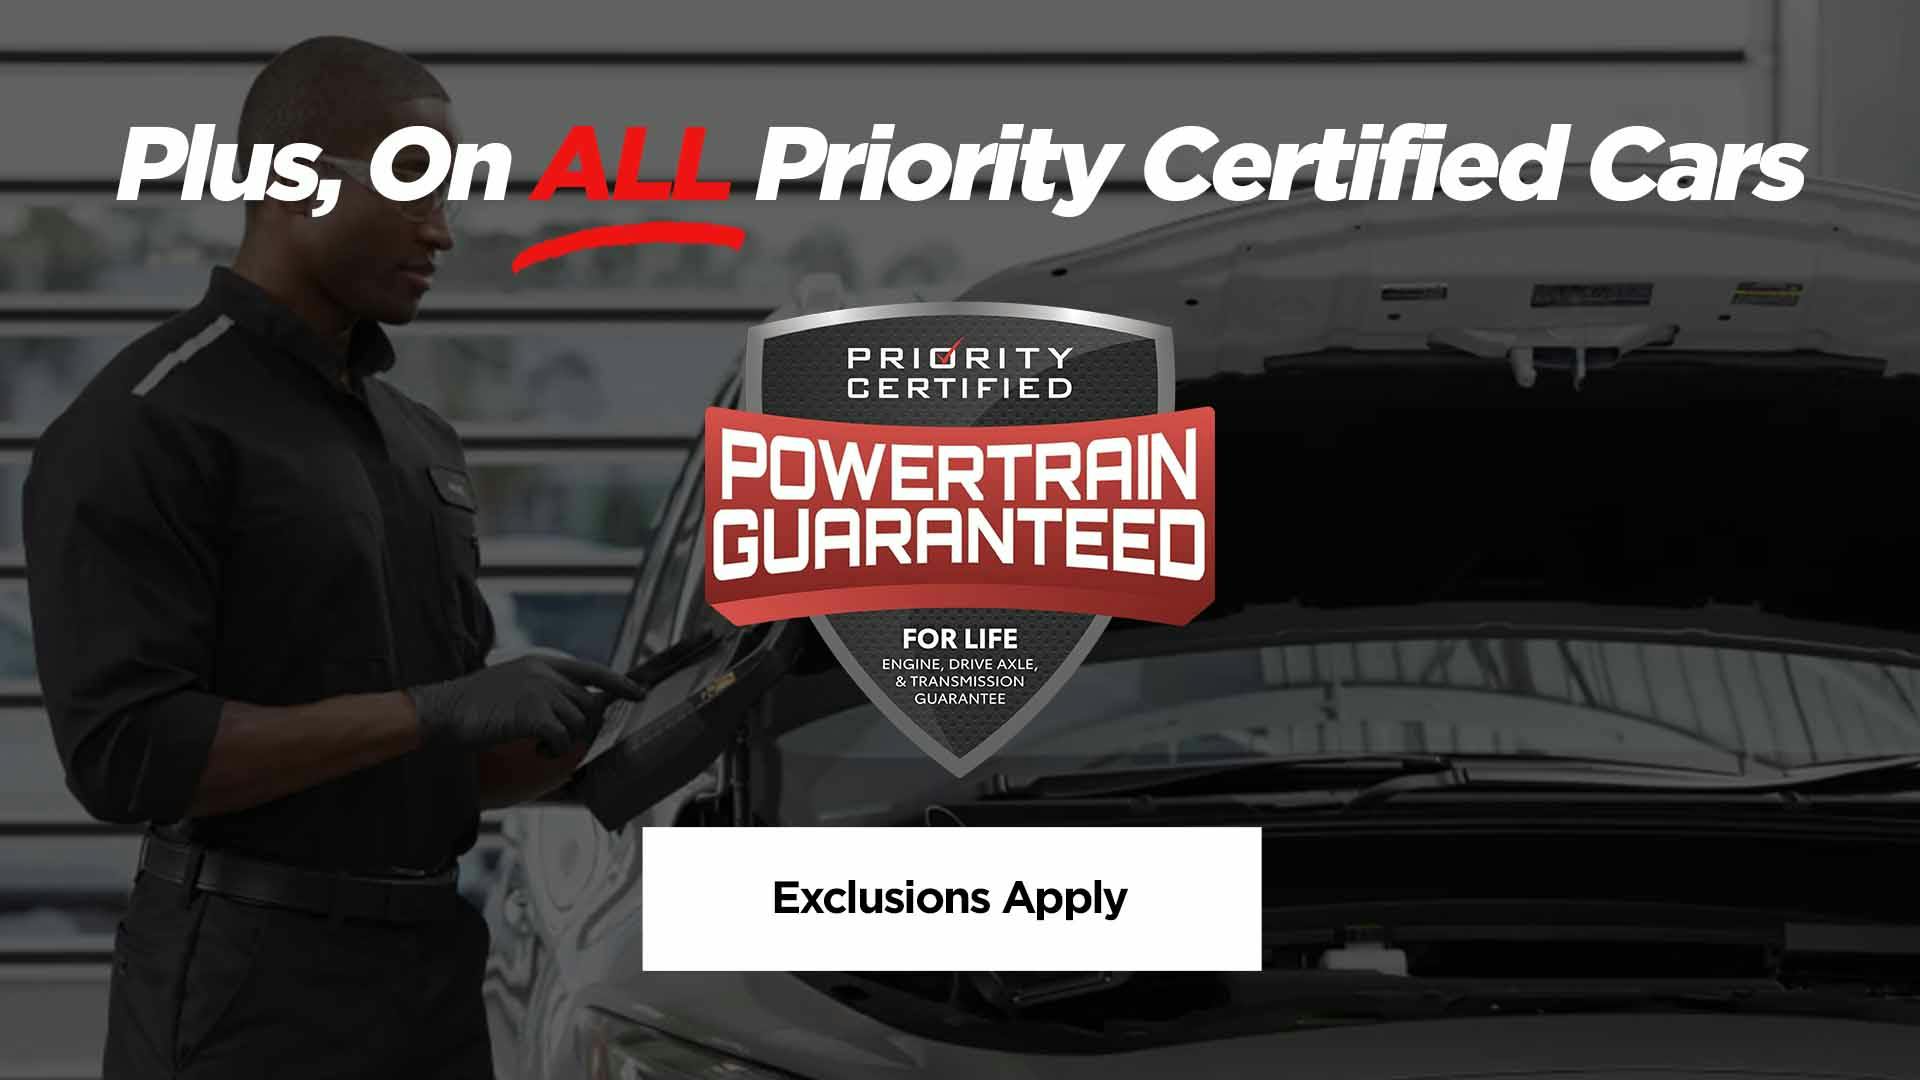 Priority Toyota Springfield Priorities For Life includes Limited Powertrain Warranty on Certified Cars. Exclusions apply, click for details.